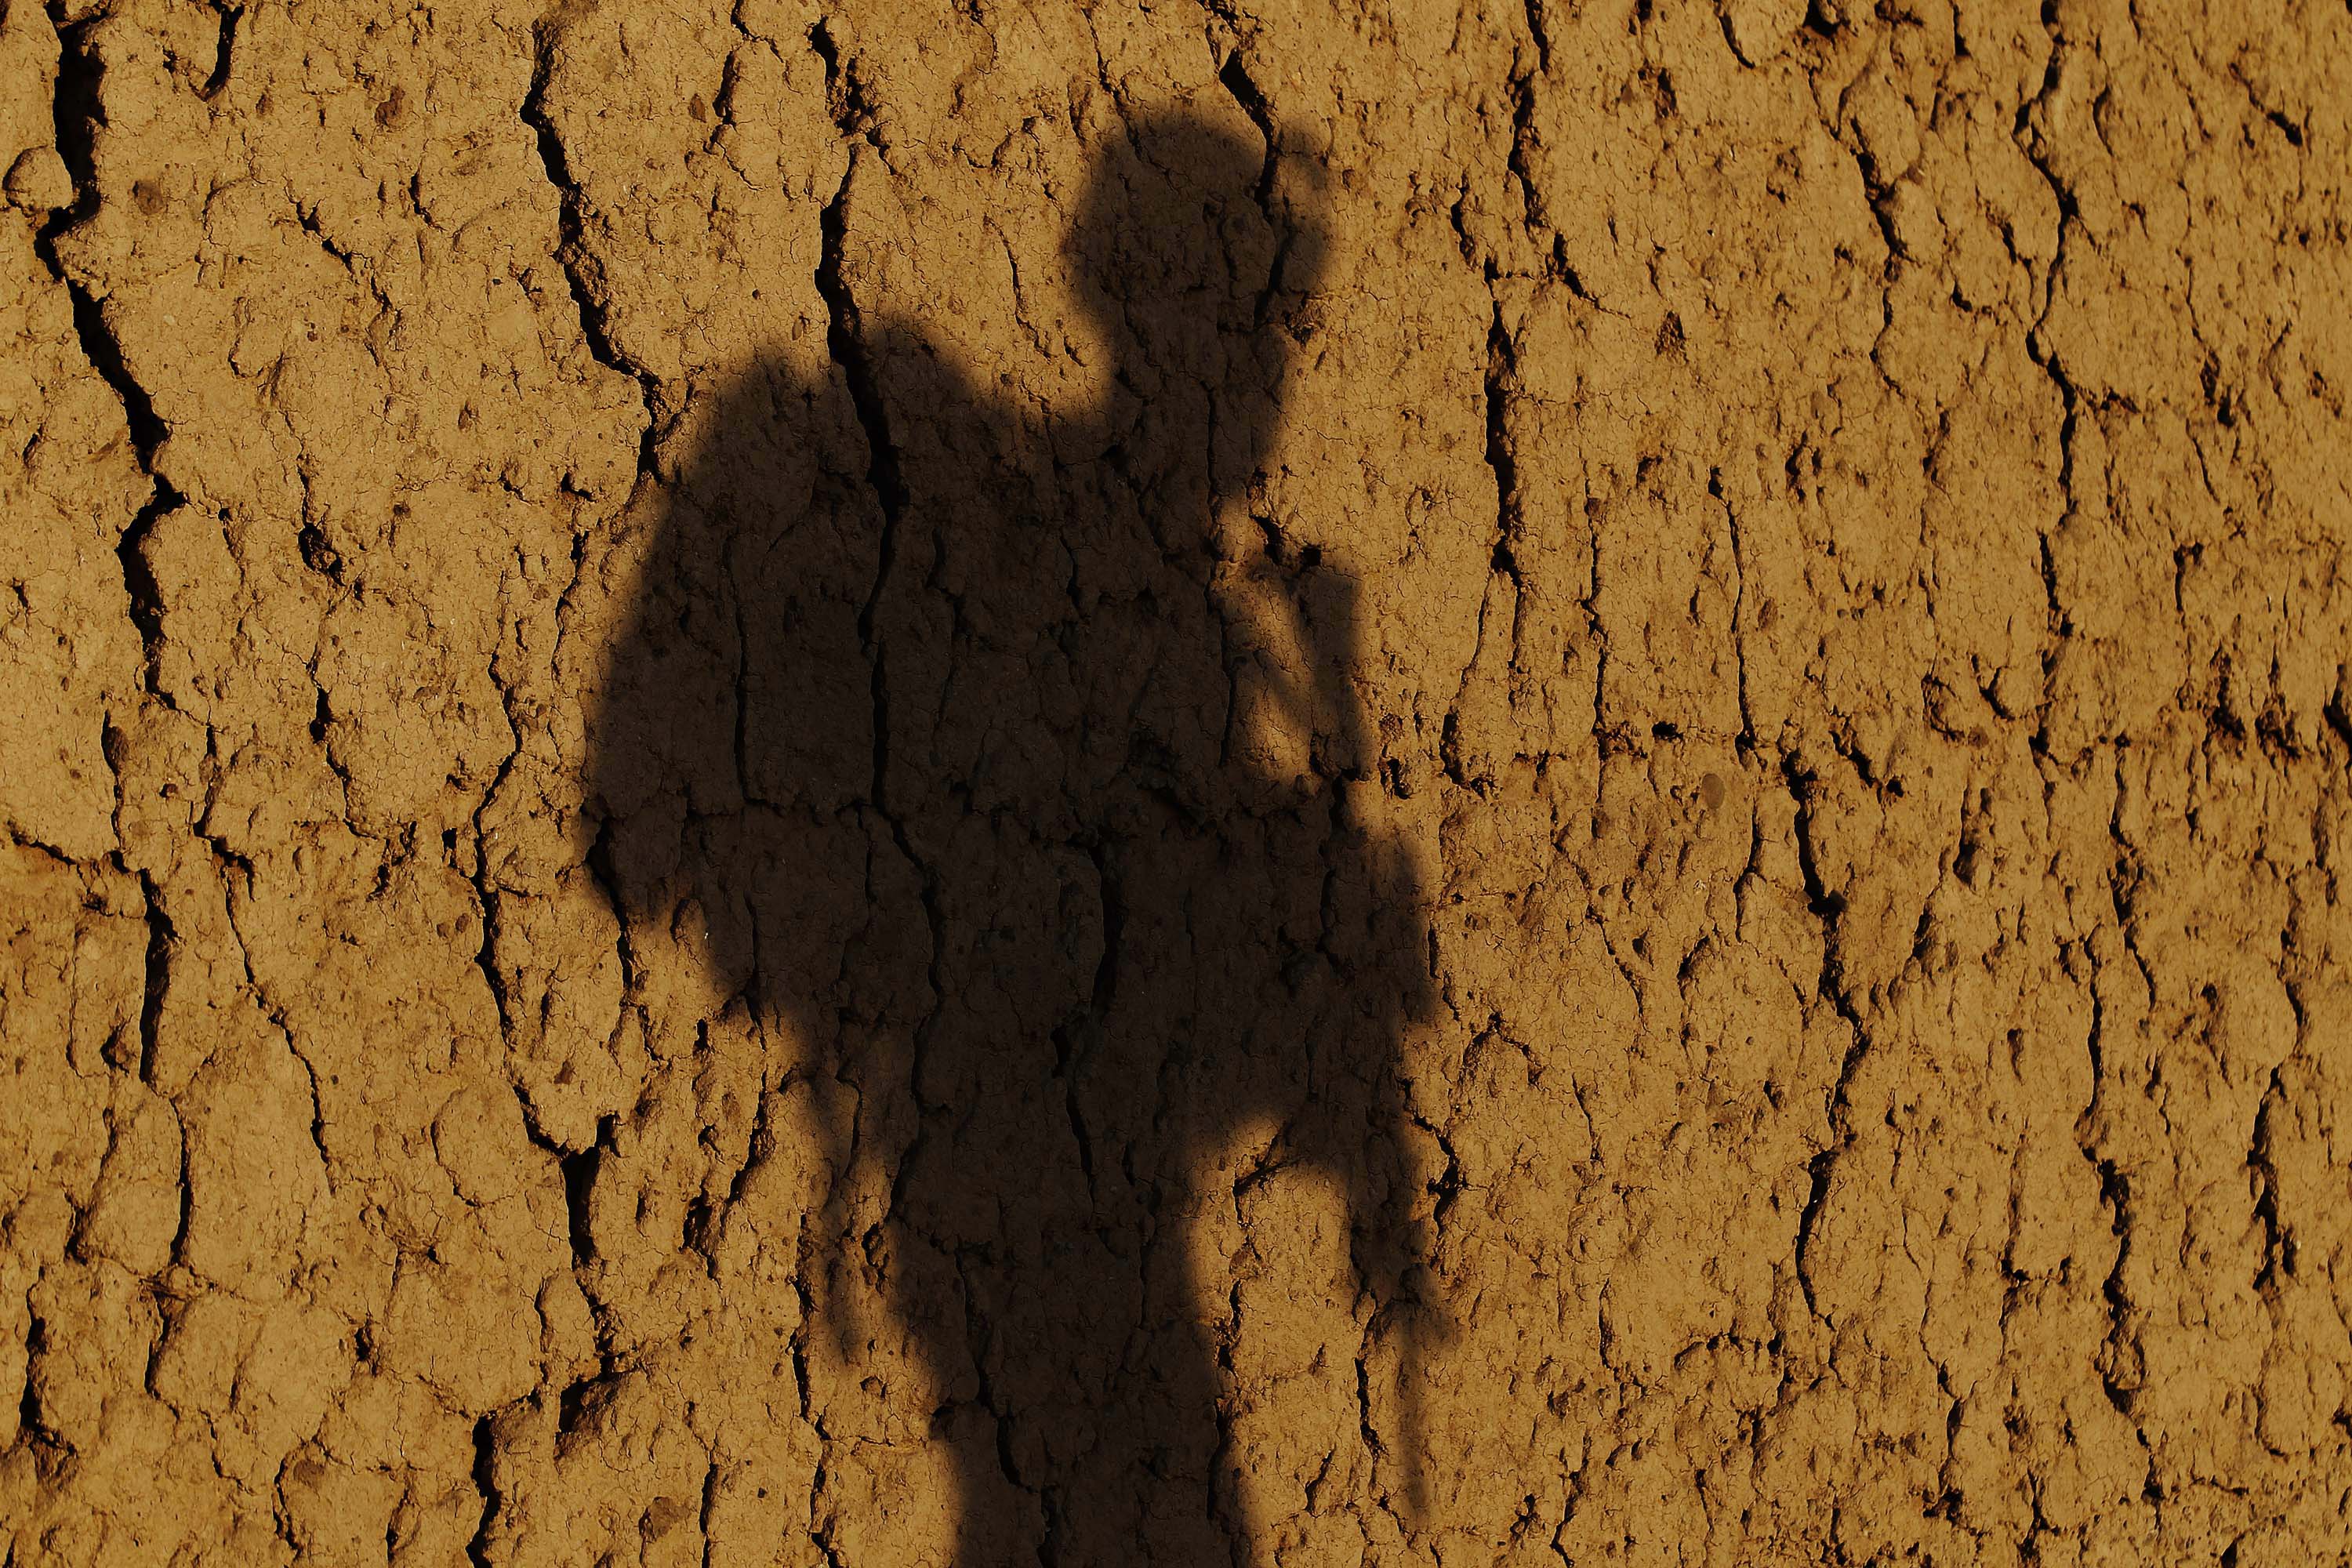 A U.S. Marine's shadow is cast on mud wall during a patrol in southern Afghanistan's Helmand province